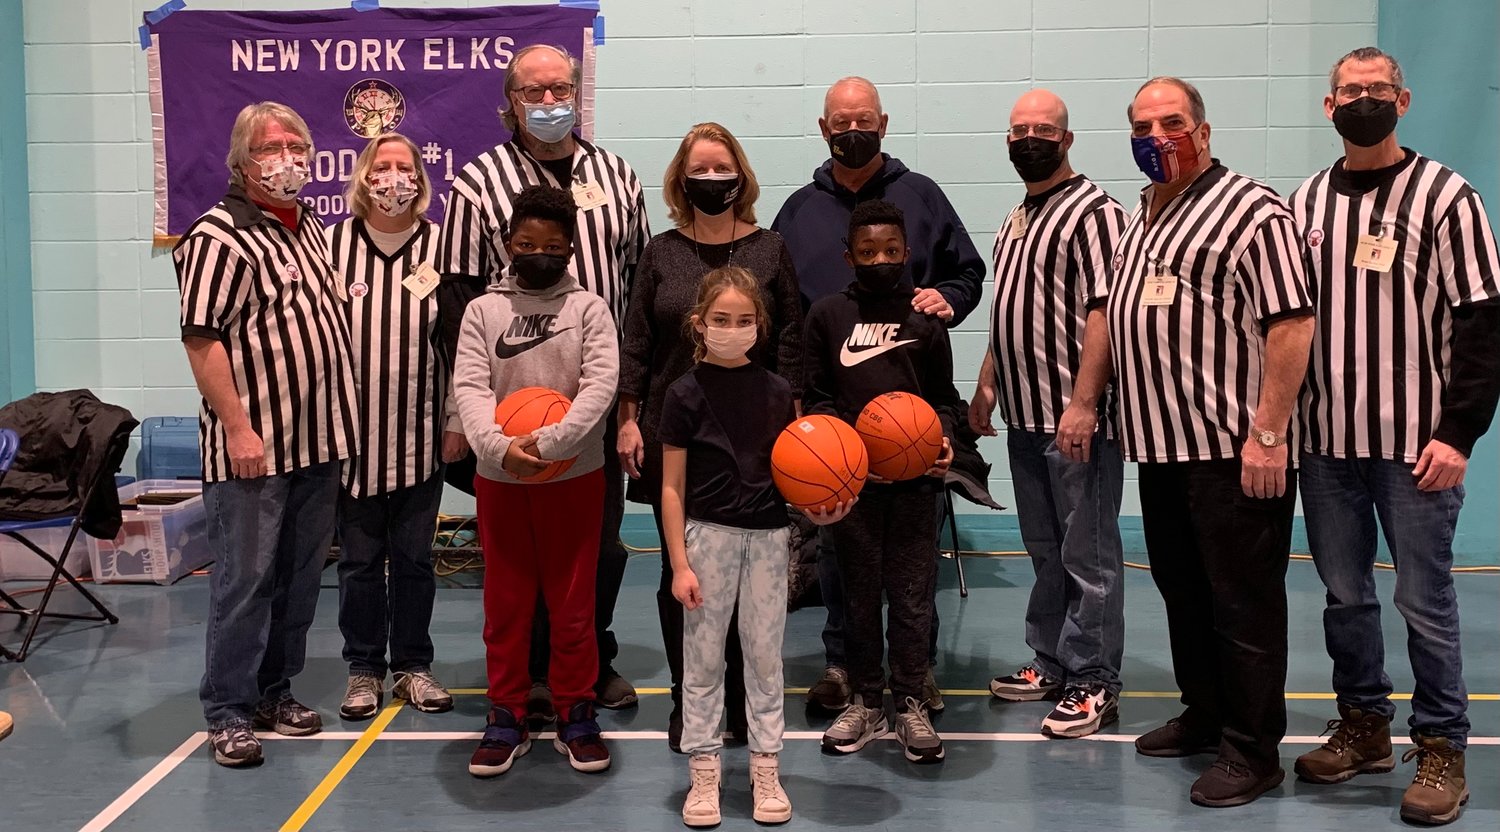 John Nuzzi Sr., second from right, headed up this year’s lodge-level Hoop Shoot, supported by Freeport Mayor Robert T. Kennedy, fourth from right, Legis. Debra Mulé, fifth from right, and members of New York Elks Lodge #1. Four children qualified for the district competition on Jan. 22.